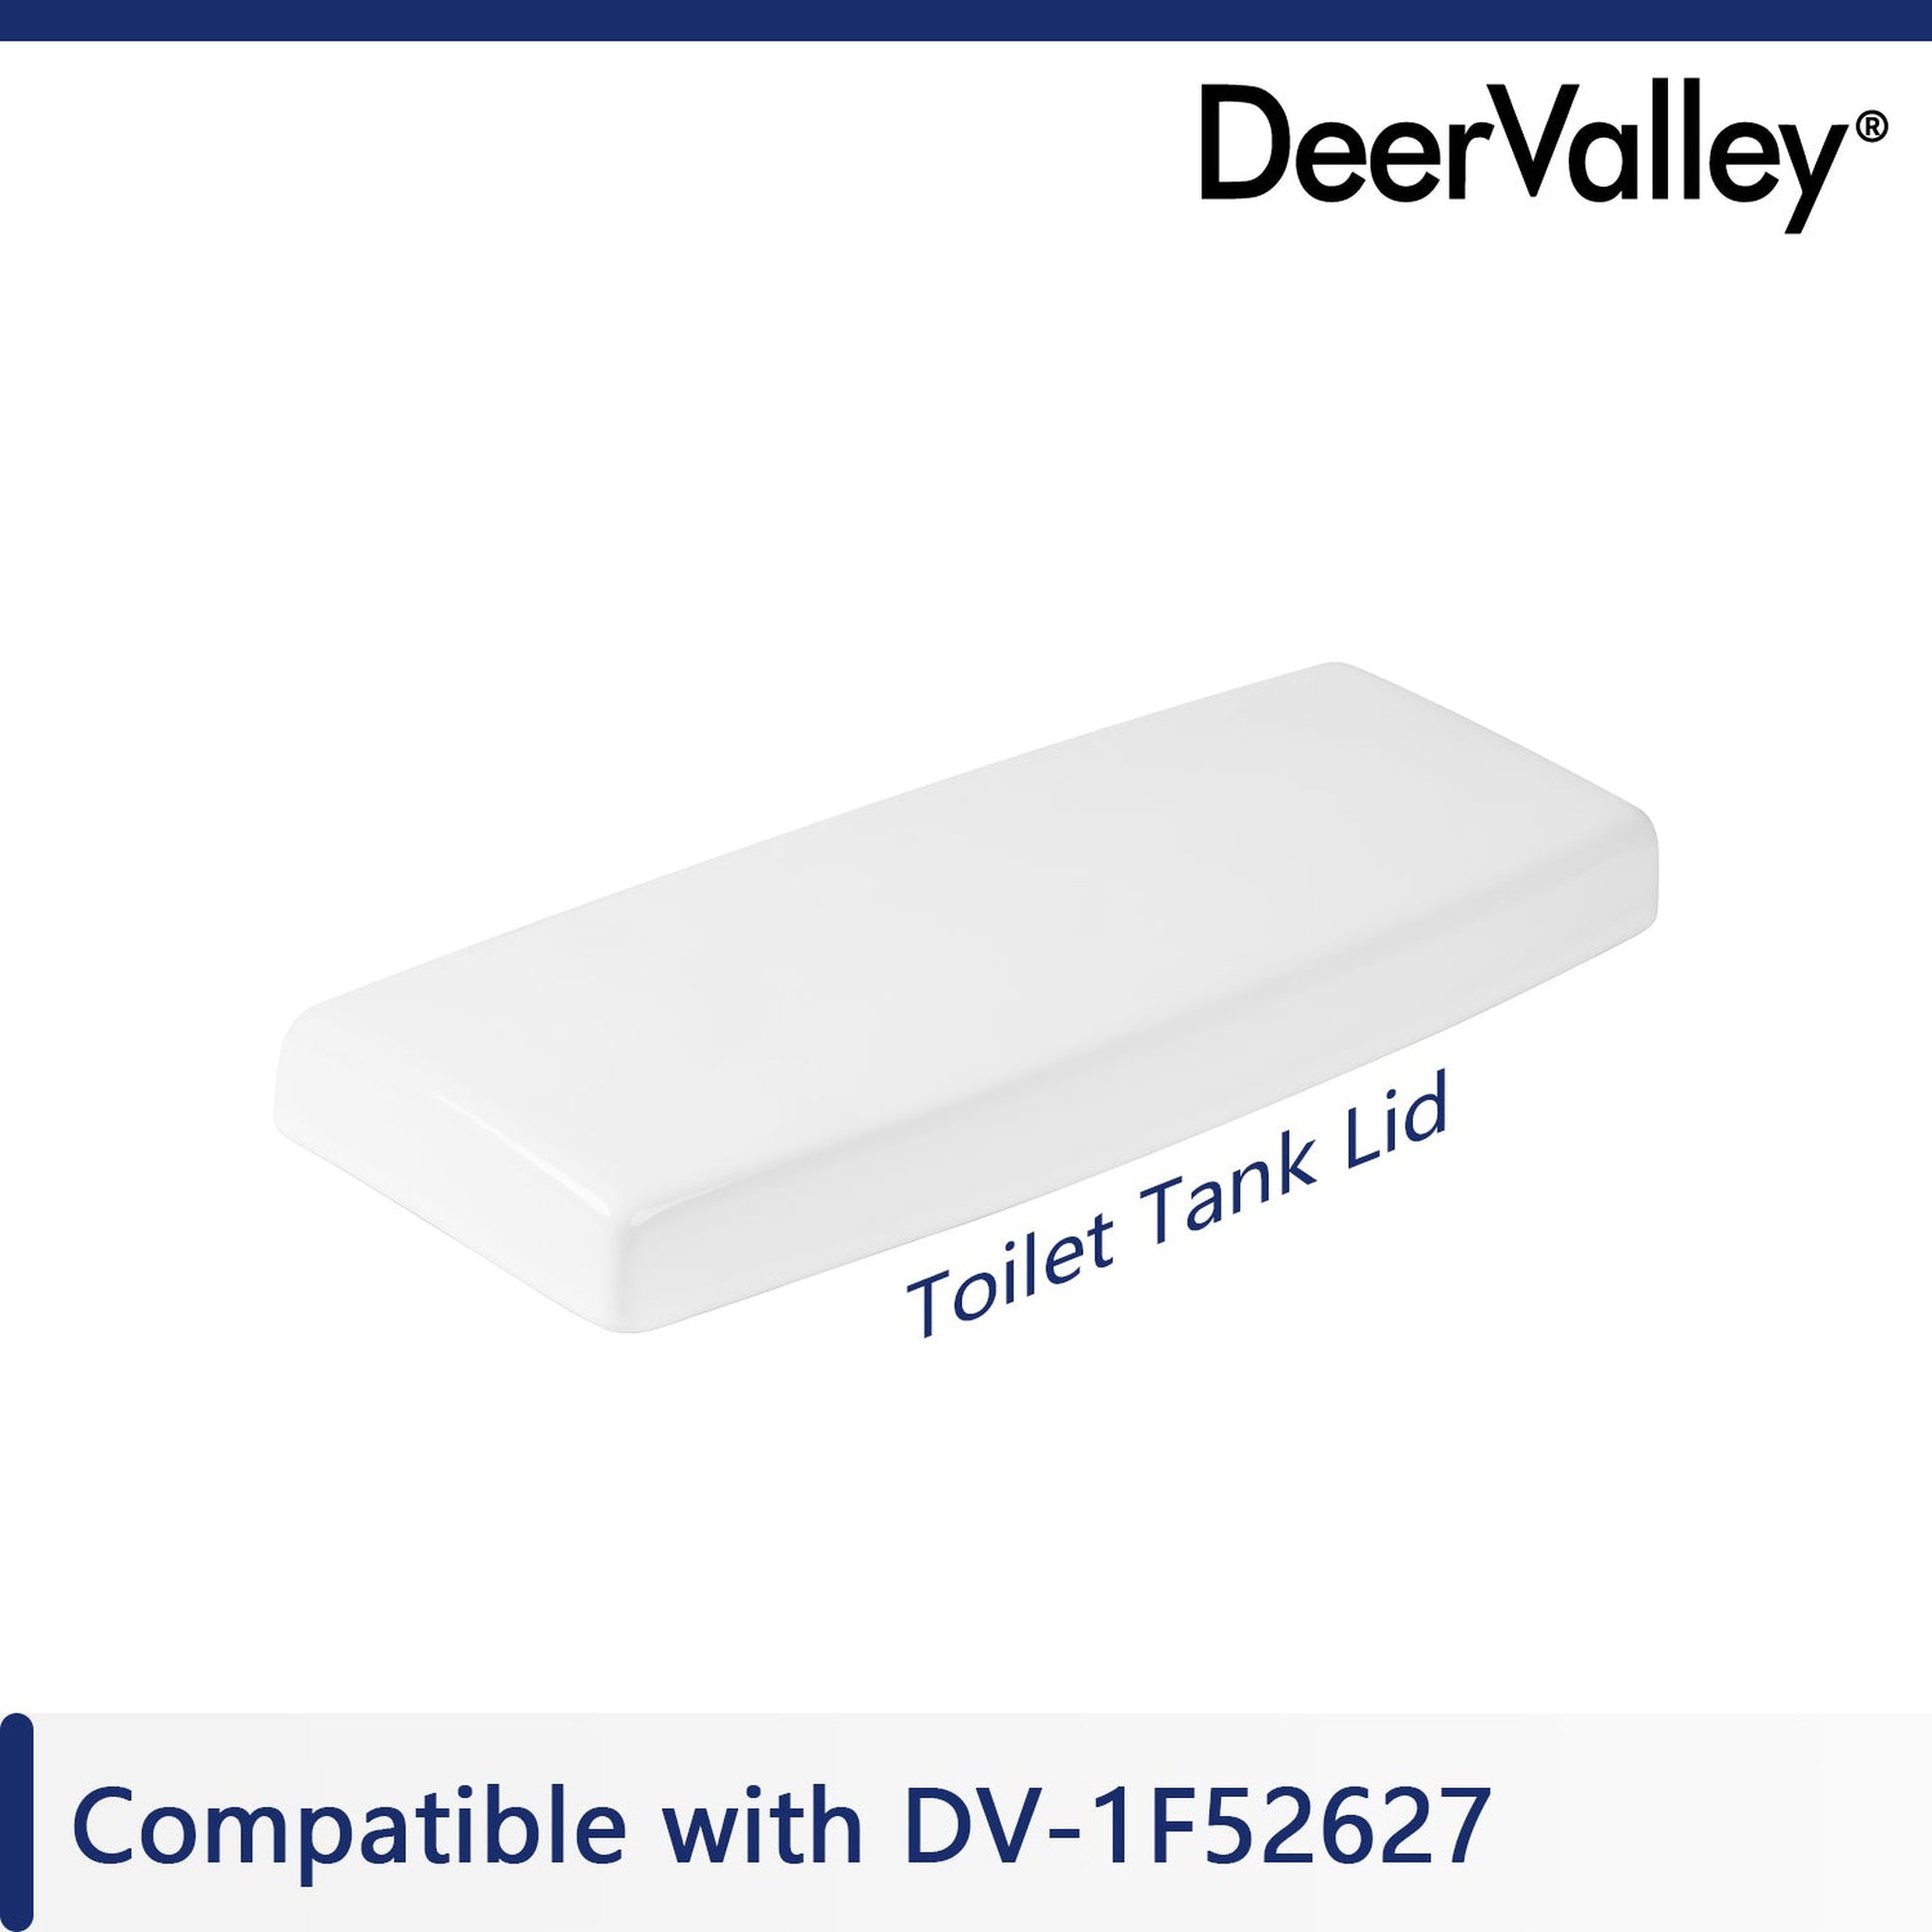 DeerValley Tank Lid (Not with a flush button, compatible with DV-DV-1F52627)